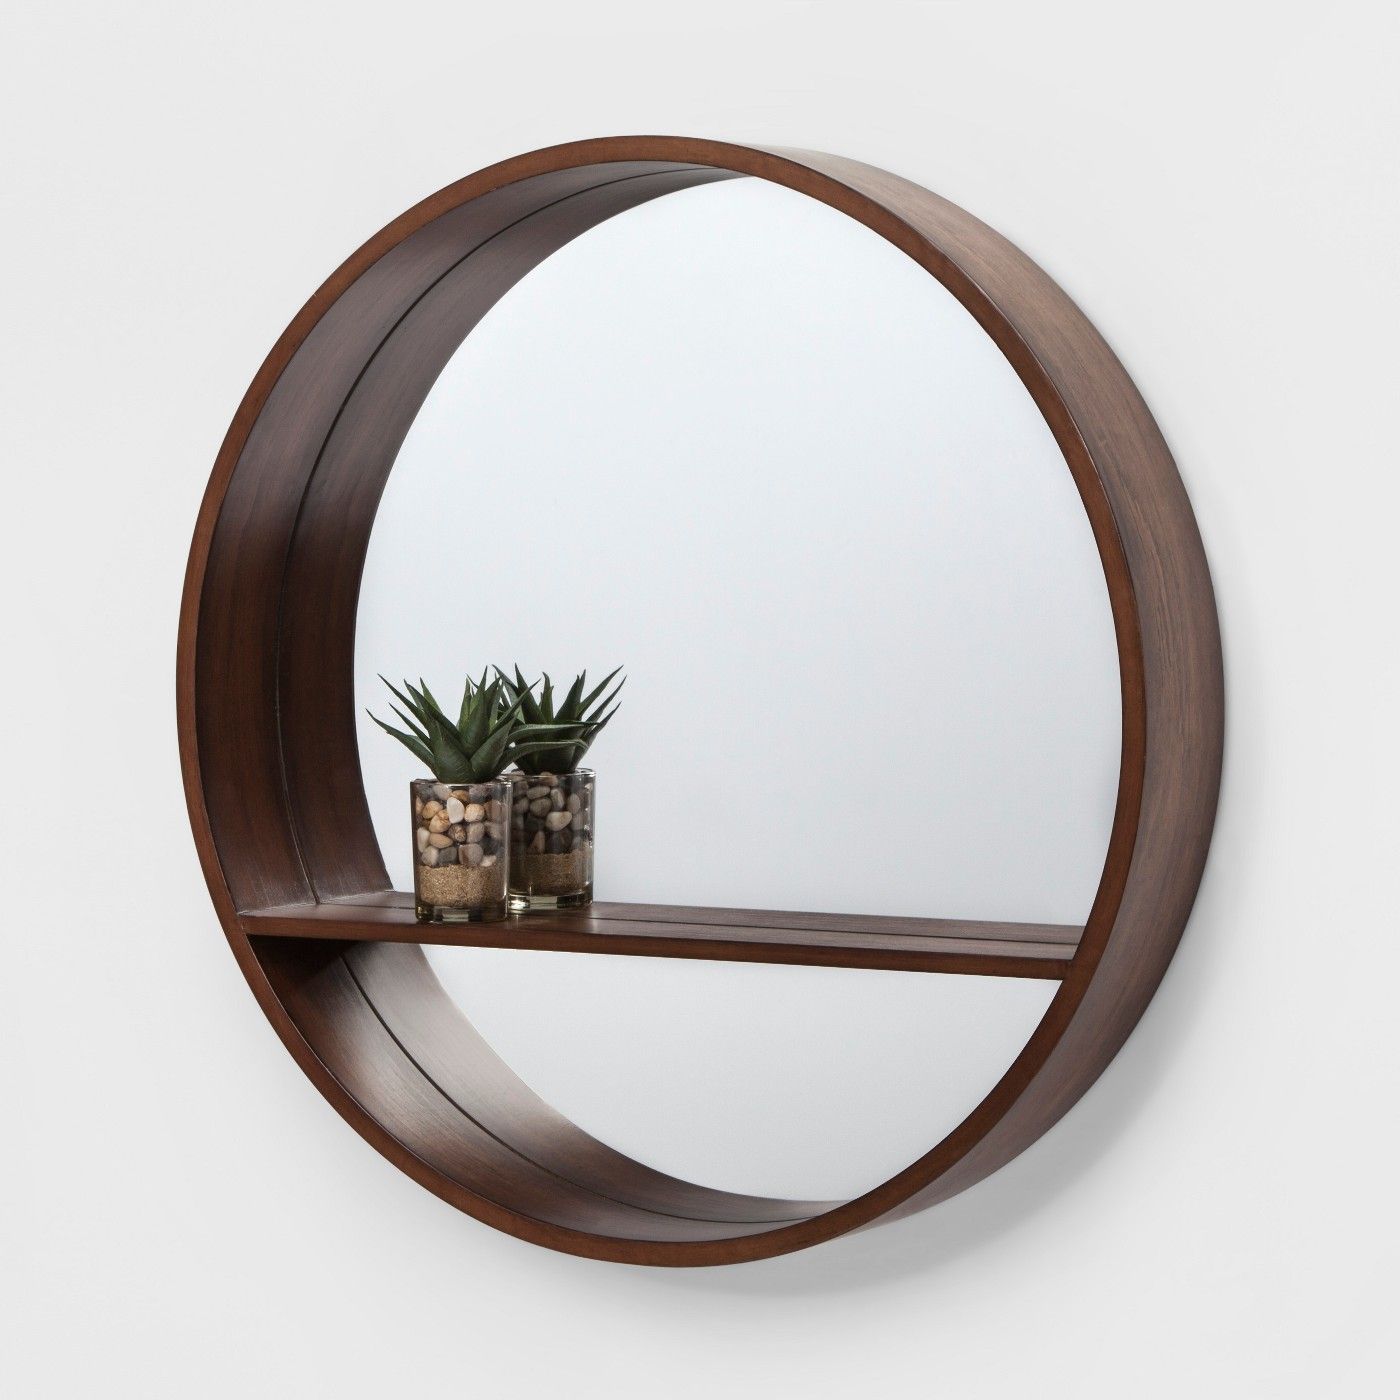 24" Walnut Round Barrel Decorative Wall Mirror With Shelf Brown Intended For Walnut Wood Wall Mirrors (View 9 of 15)